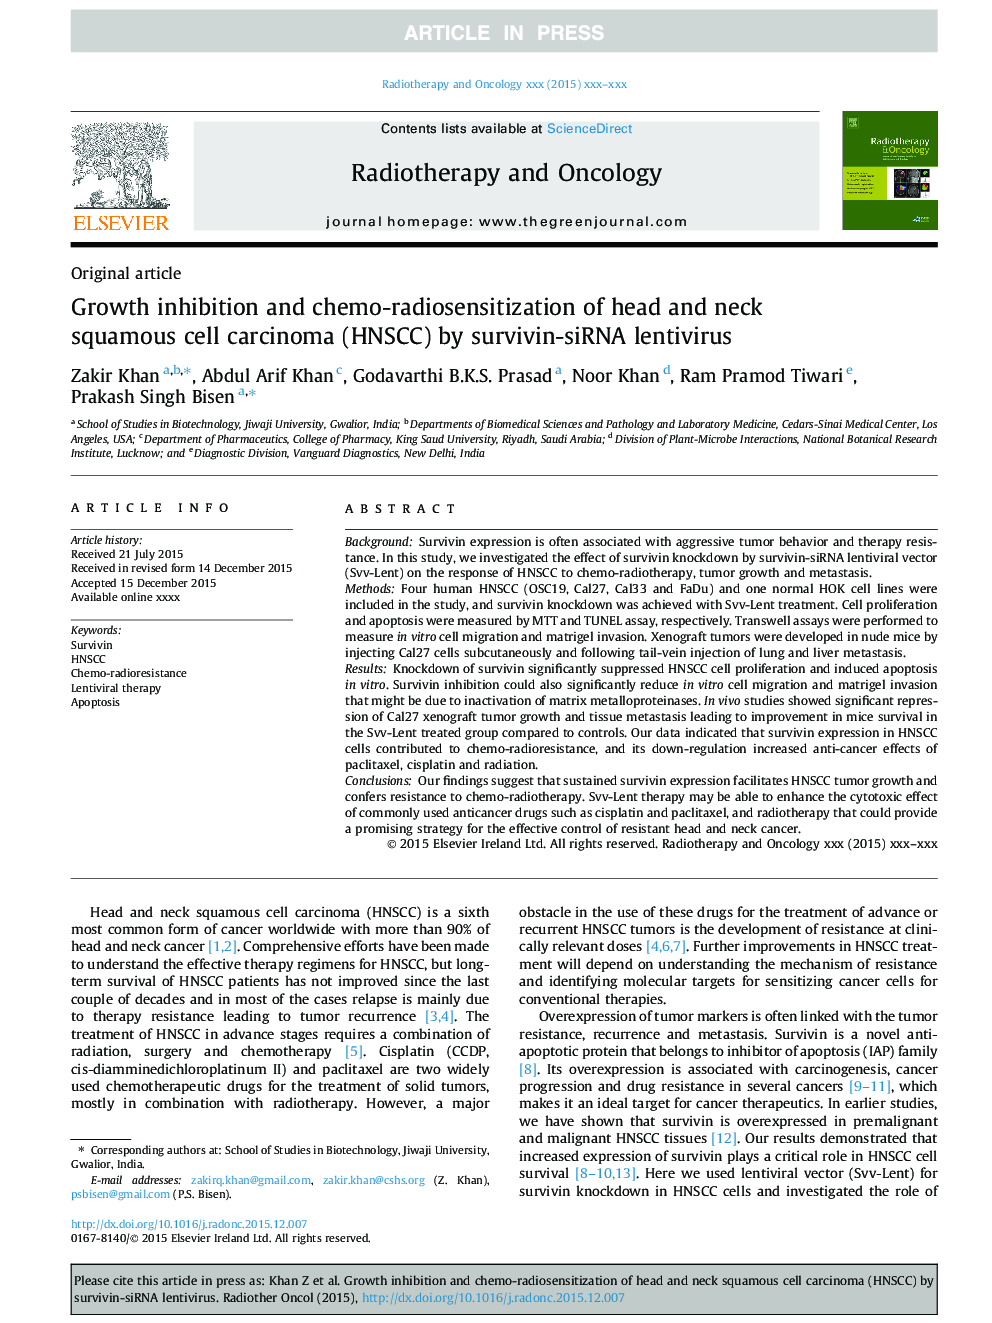 Growth inhibition and chemo-radiosensitization of head and neck squamous cell carcinoma (HNSCC) by survivin-siRNA lentivirus